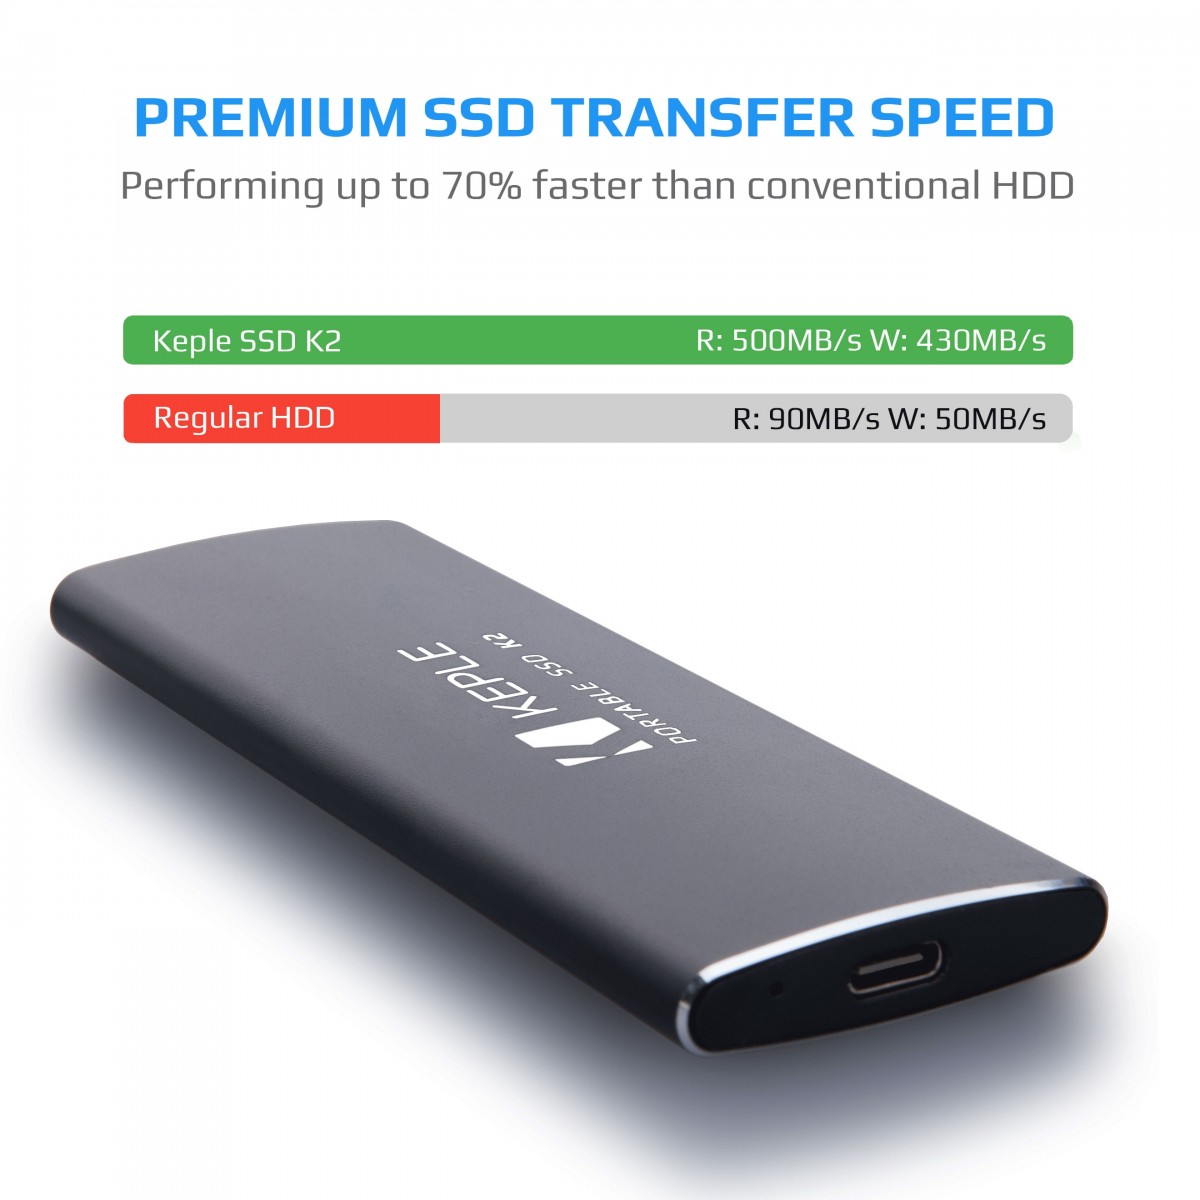 External SSD Solid Sate Drive 240GB Compatible with PC Laptop, Macbook,  Tablet, Android Smartphone, Desktop, Xbox One, Chromebook, HP, ASUS, Dell,  Gaming Portable USB C 3.1 Backup Hard Drive Memor